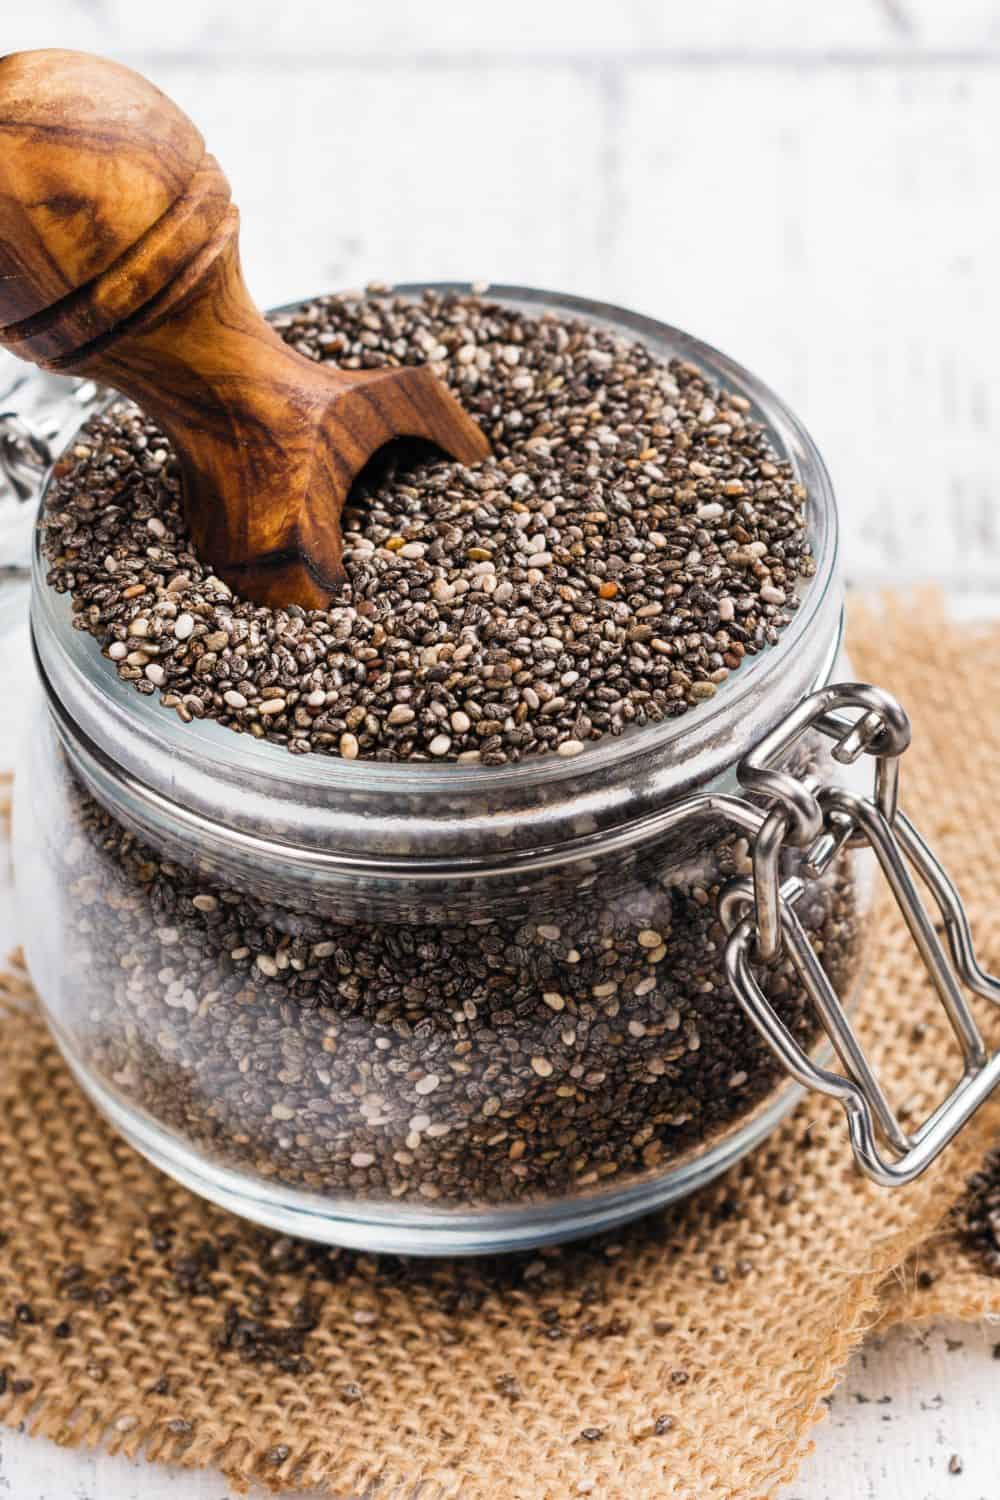 Mason jar full of chia seeds. The image is for a recipe post on chia seeds for breakfats.